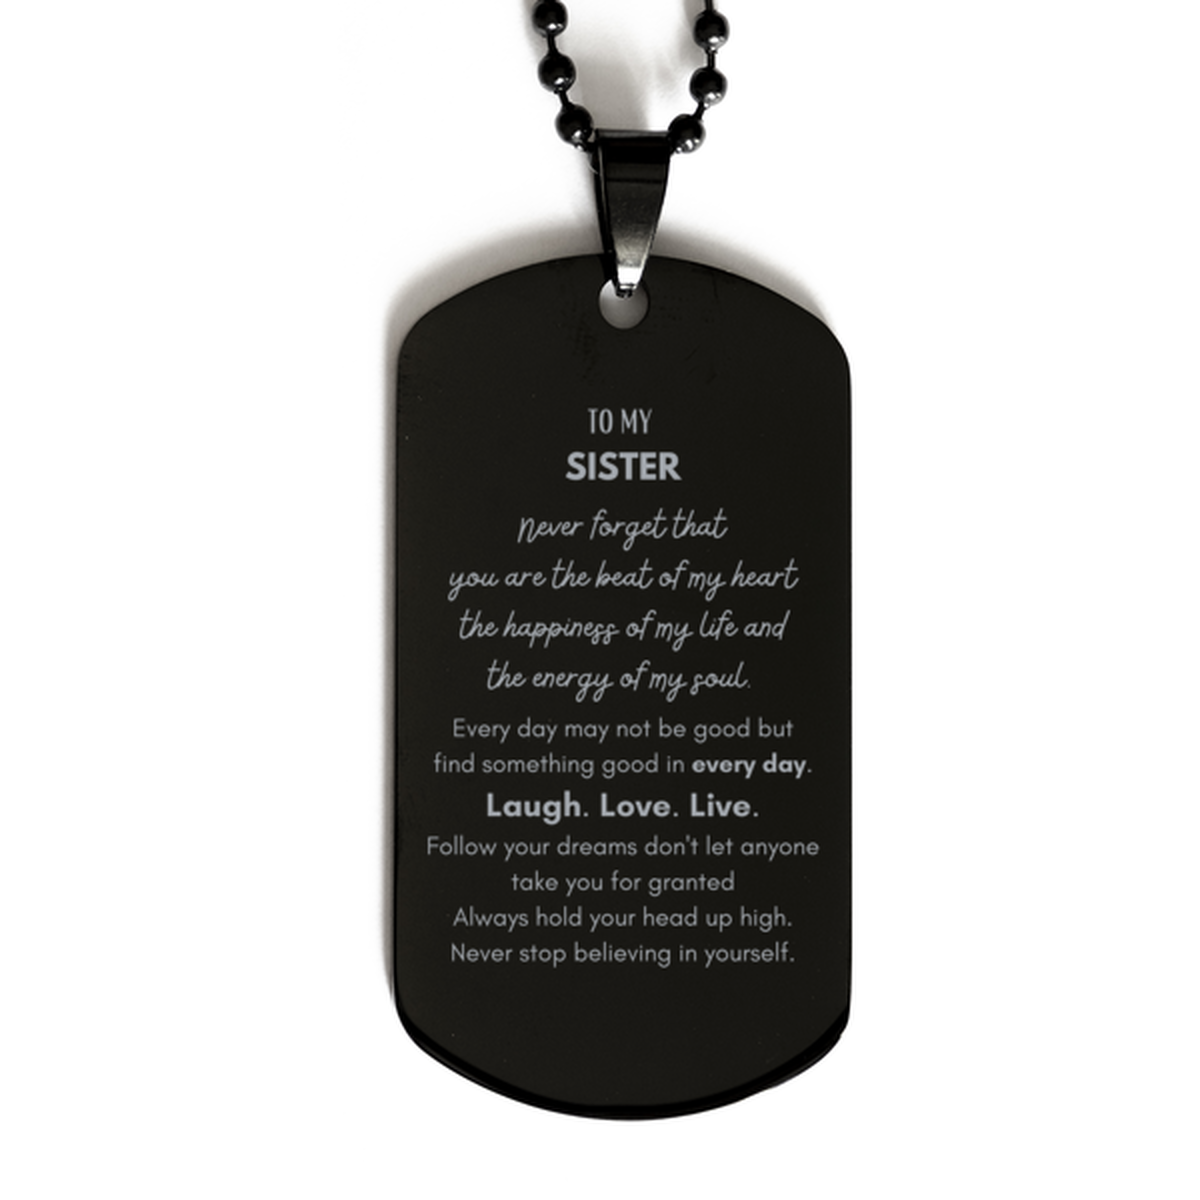 To My Sister Dogtag Gifts, Christmas Sister Black Dog Tag Present, Birthday Unique Motivational For Sister, To My Sister Never forget that you are the beat of my heart the happiness of my life and the energy of my soul